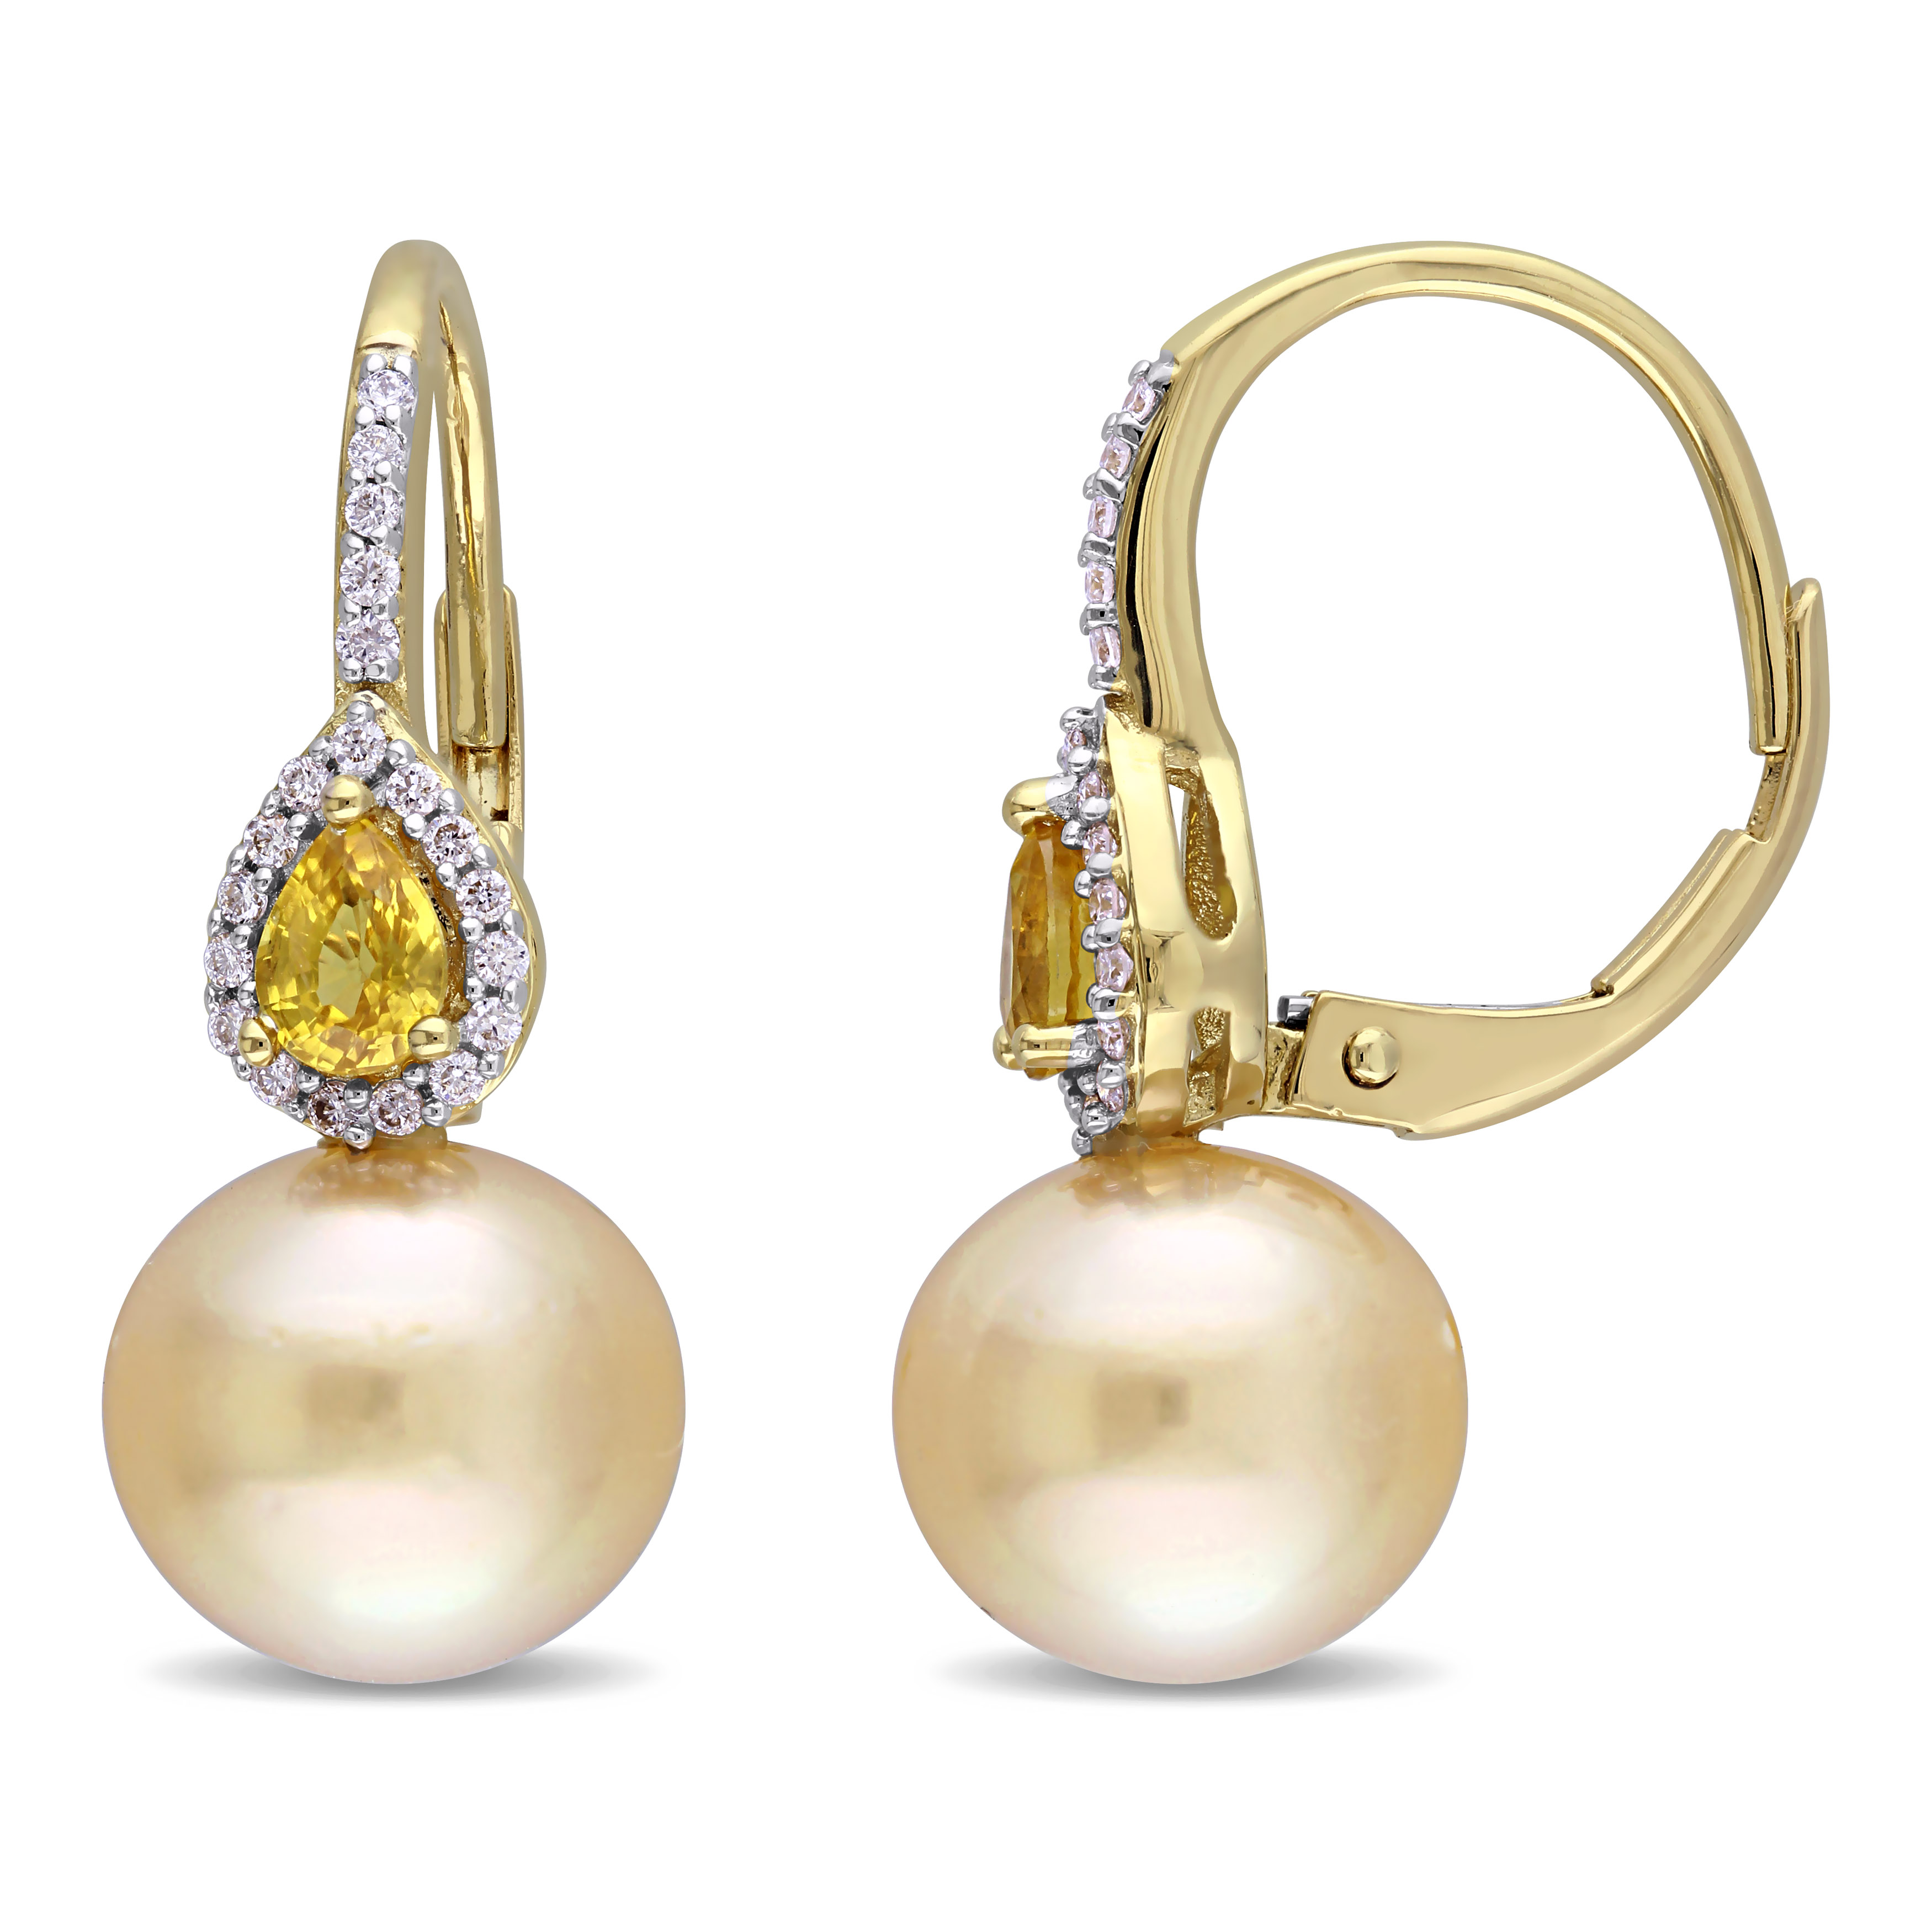 1/8 CT TW Diamond, 9 - 9.5 MM Golden South Sea Pearl and Yellow Sapphire Drop Leverback Earrings in 14k Yellow Gold